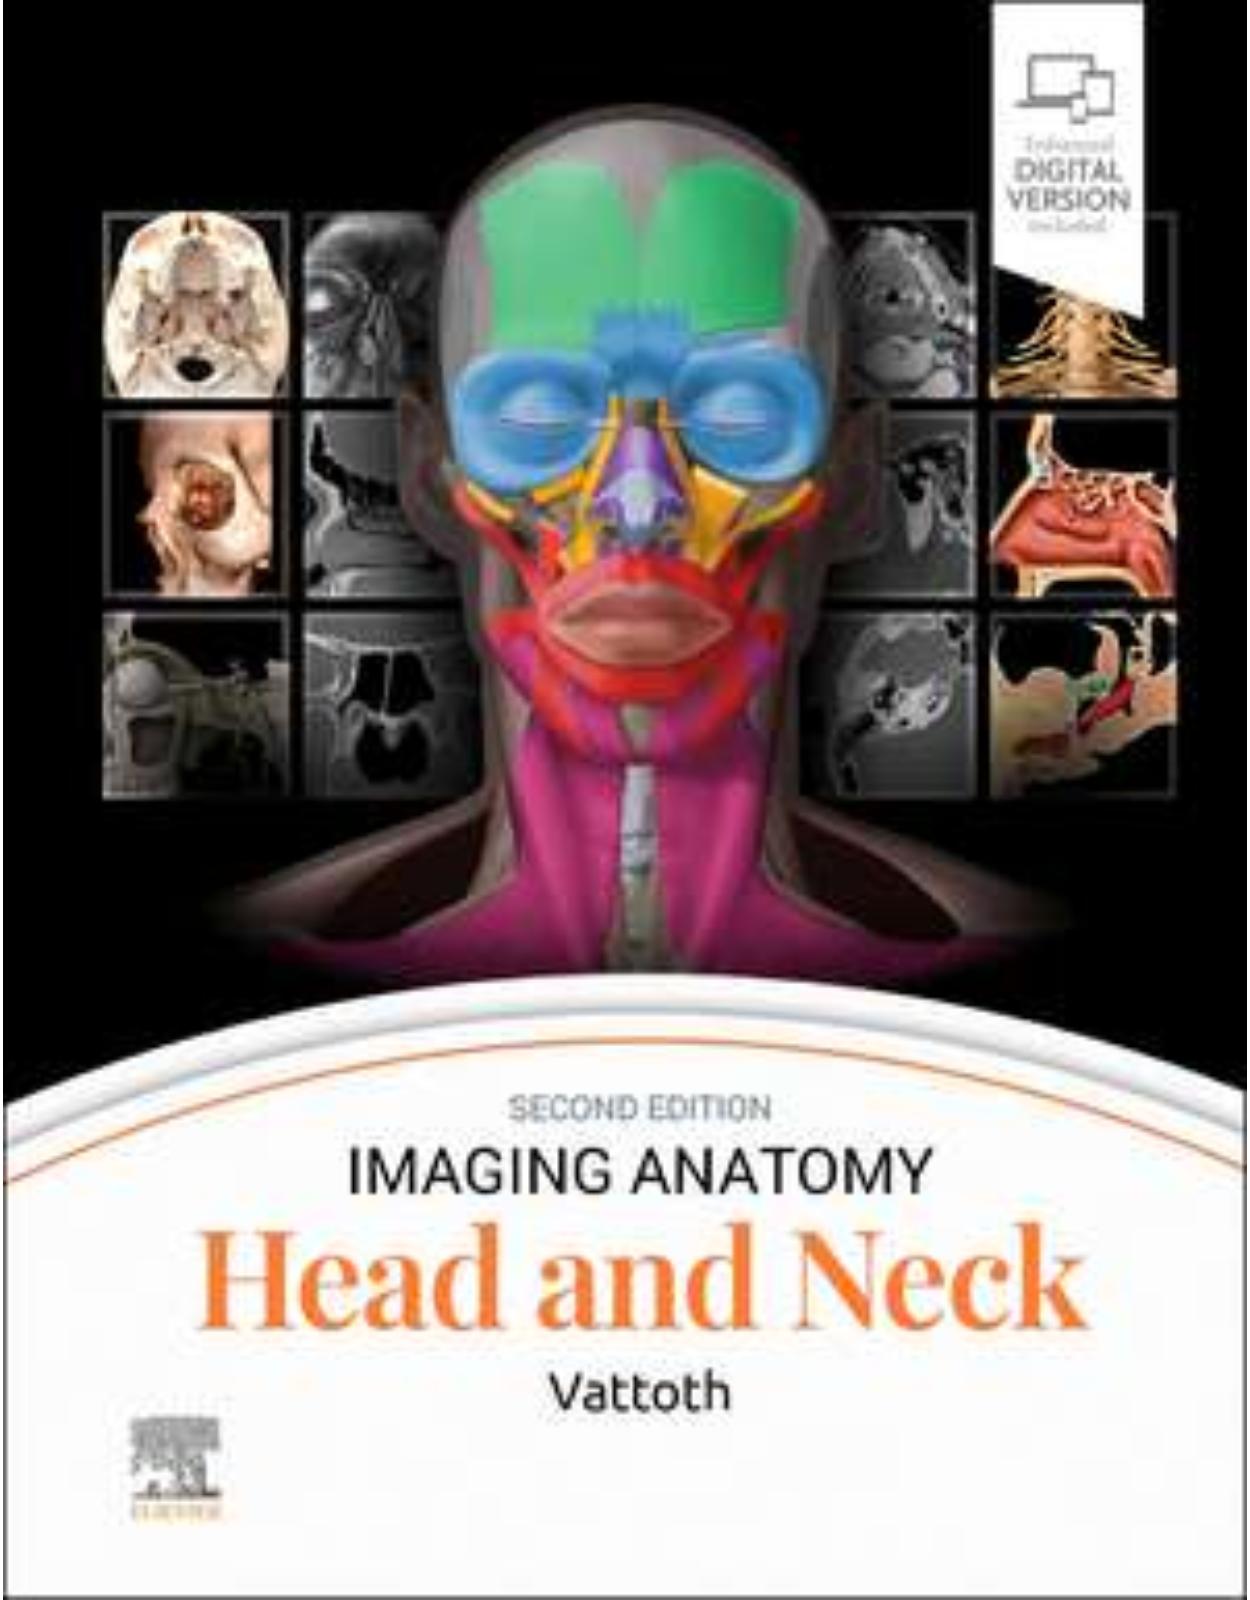 Imaging Anatomy: Head and Neck, Second edtition